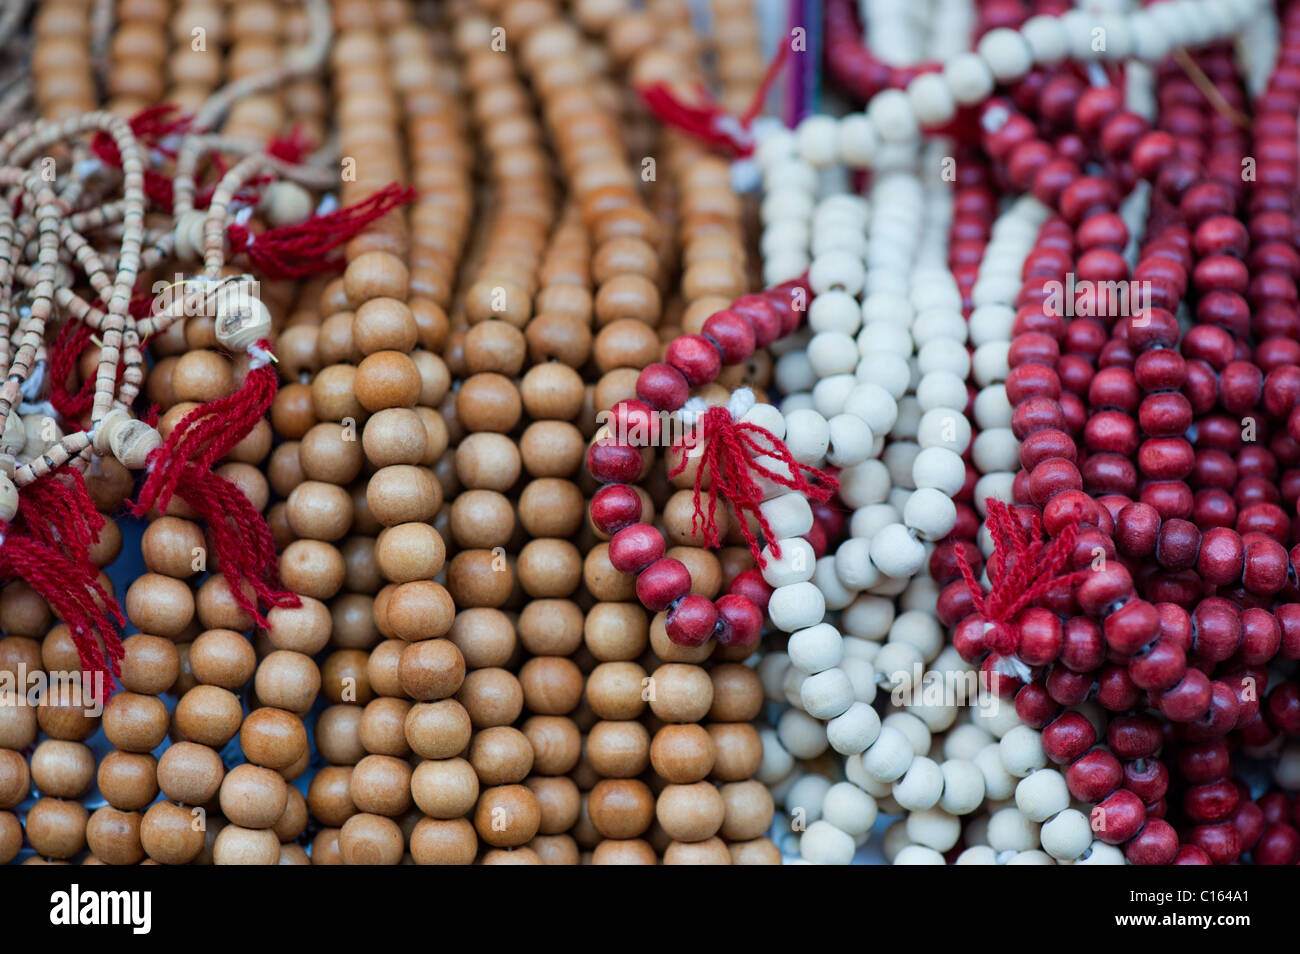 Indian wooden prayer beads (counting beads) on a market stall. India Stock Photo